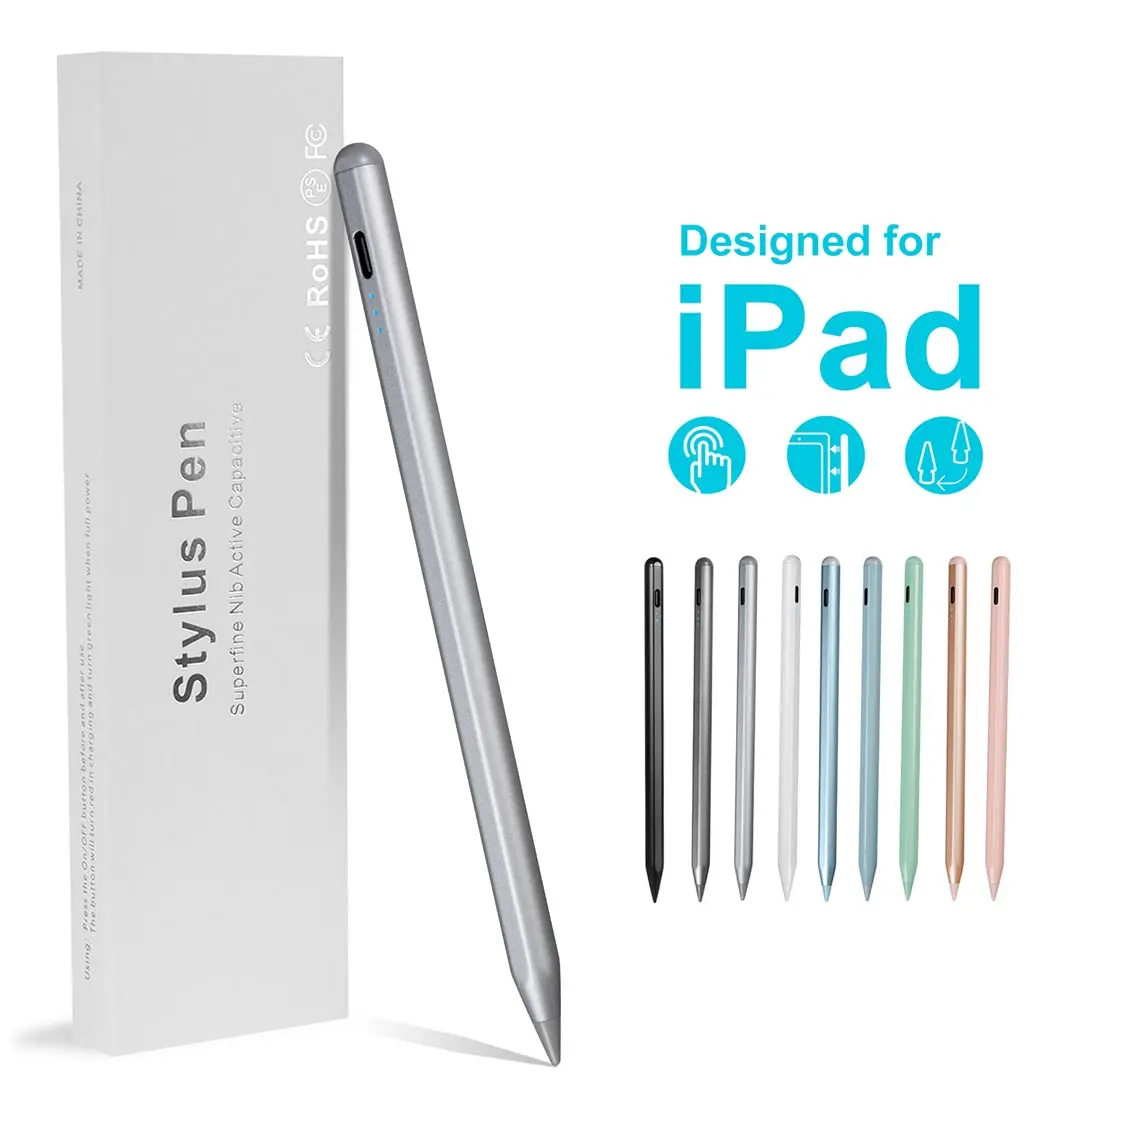 Active Capacitive Stylus For Ipad With Palm Rejection Stylus Pen For Touch Screen